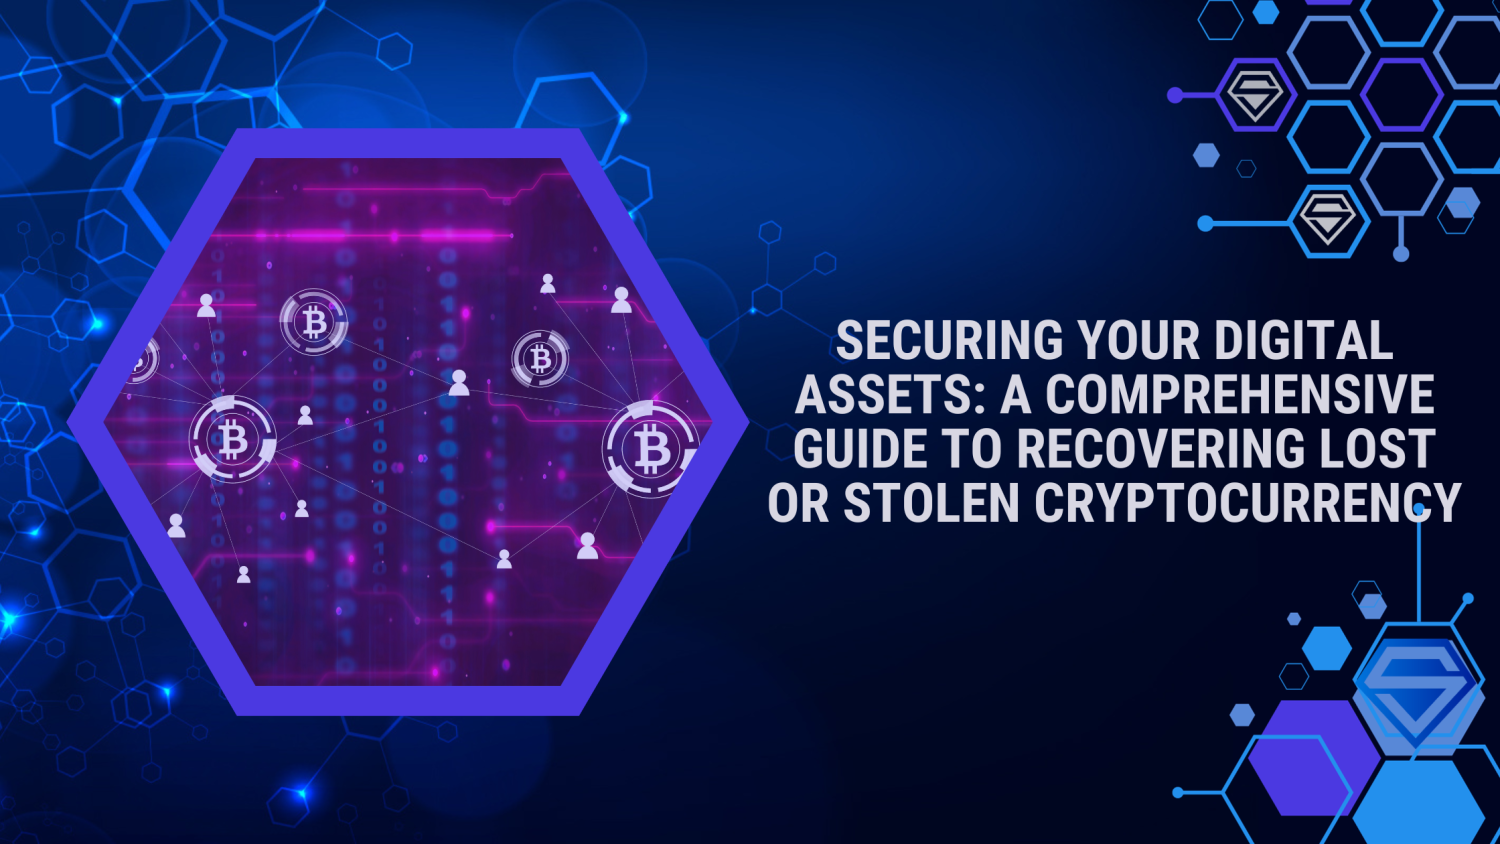 How to Recover Lost or Stolen Cryptocurrency: Guide to Wallet Restoration